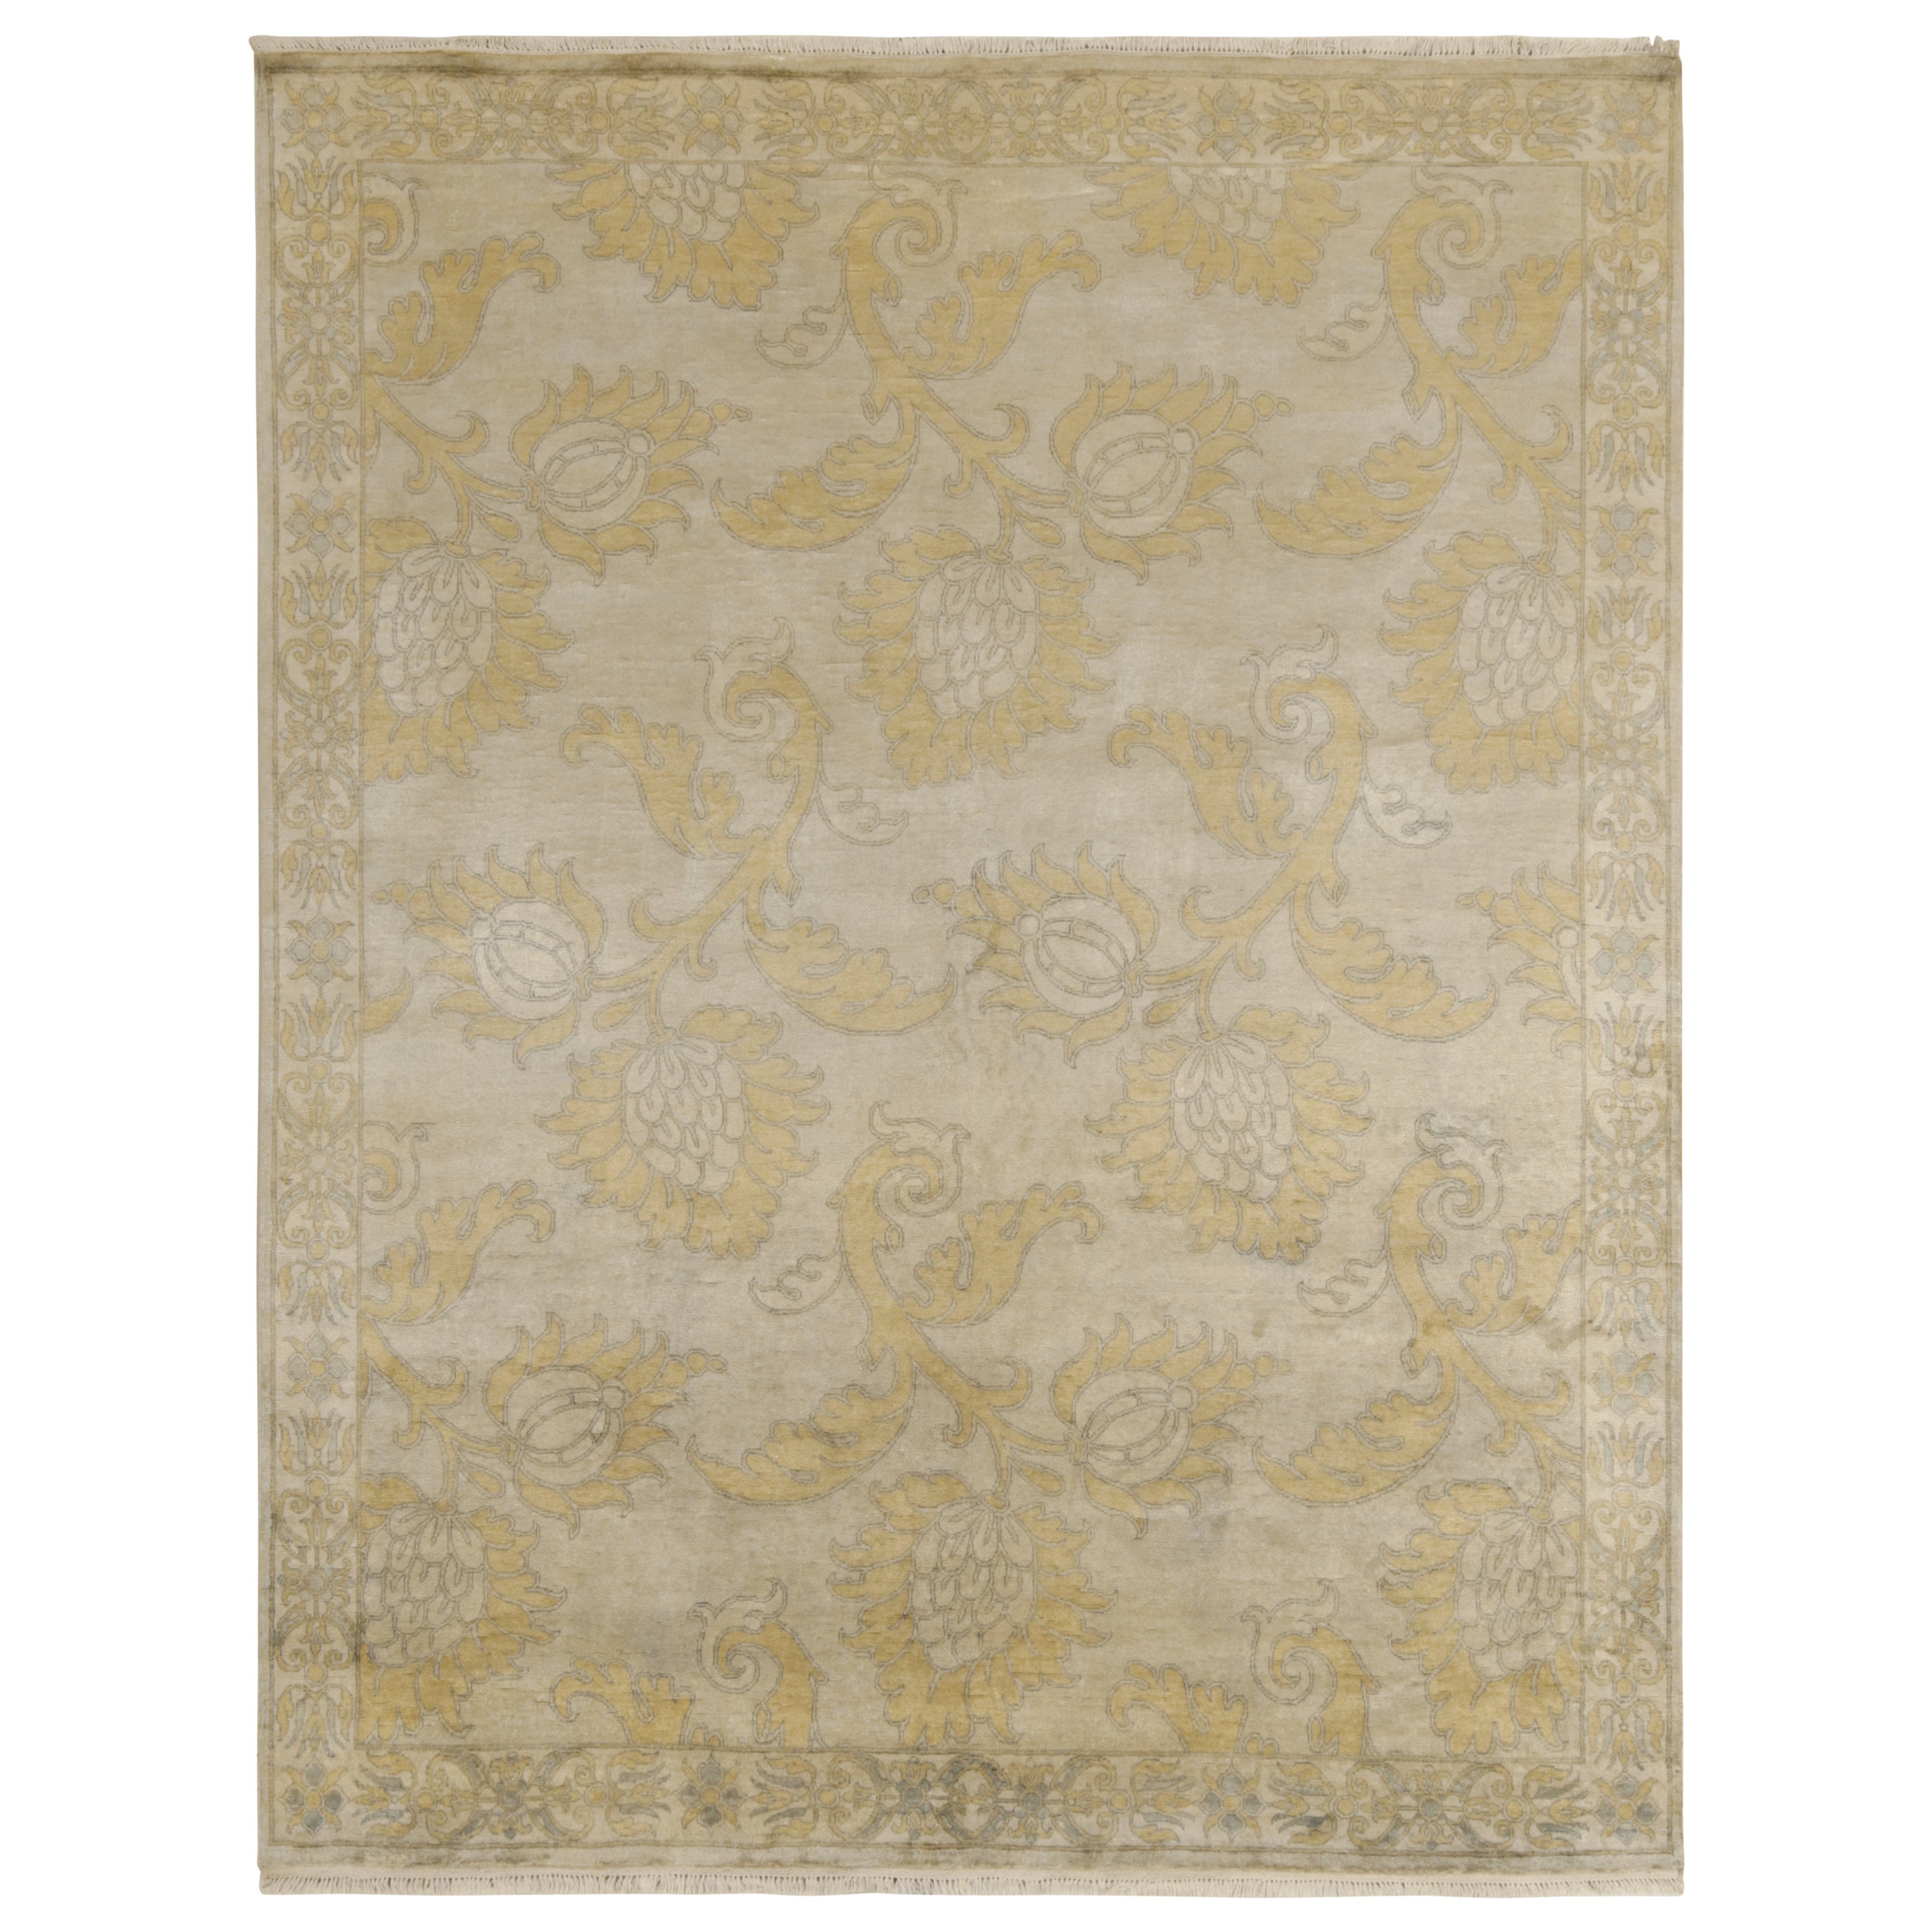 Rug & Kilim’s Classic Style rug in Tan with Blue and Gold Floral Patterns For Sale